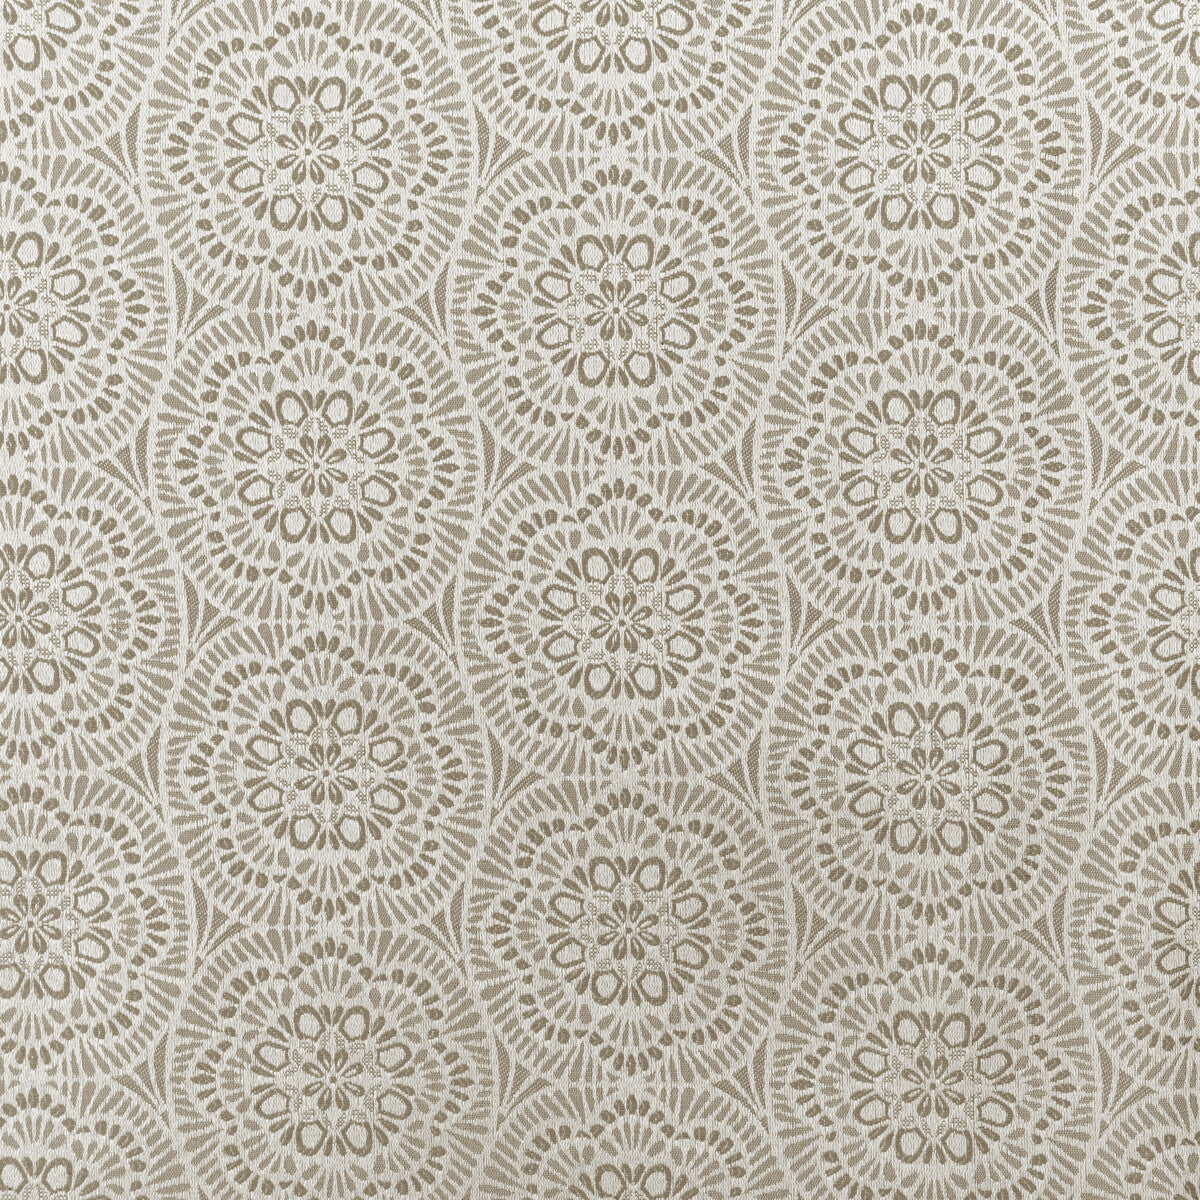 Tessa fabric in moonstone color - pattern 31544.106.0 - by Kravet Contract in the Gis Crypton collection